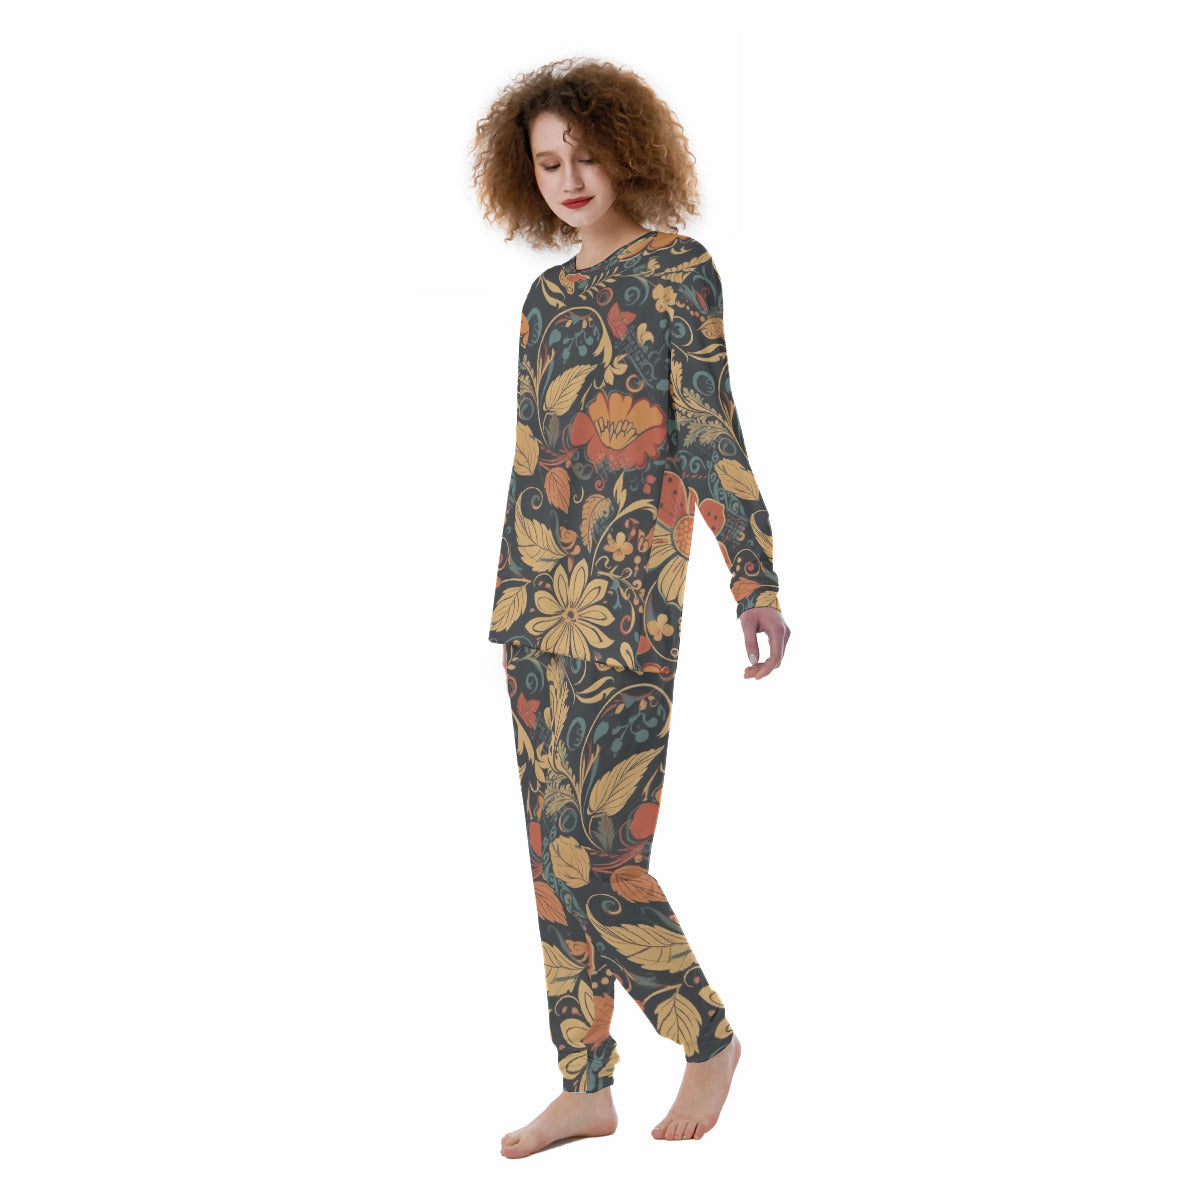 Antique Floral 100% Cotton Pajama Set | Hypoallergenic - Allergy Friendly - Naturally Free